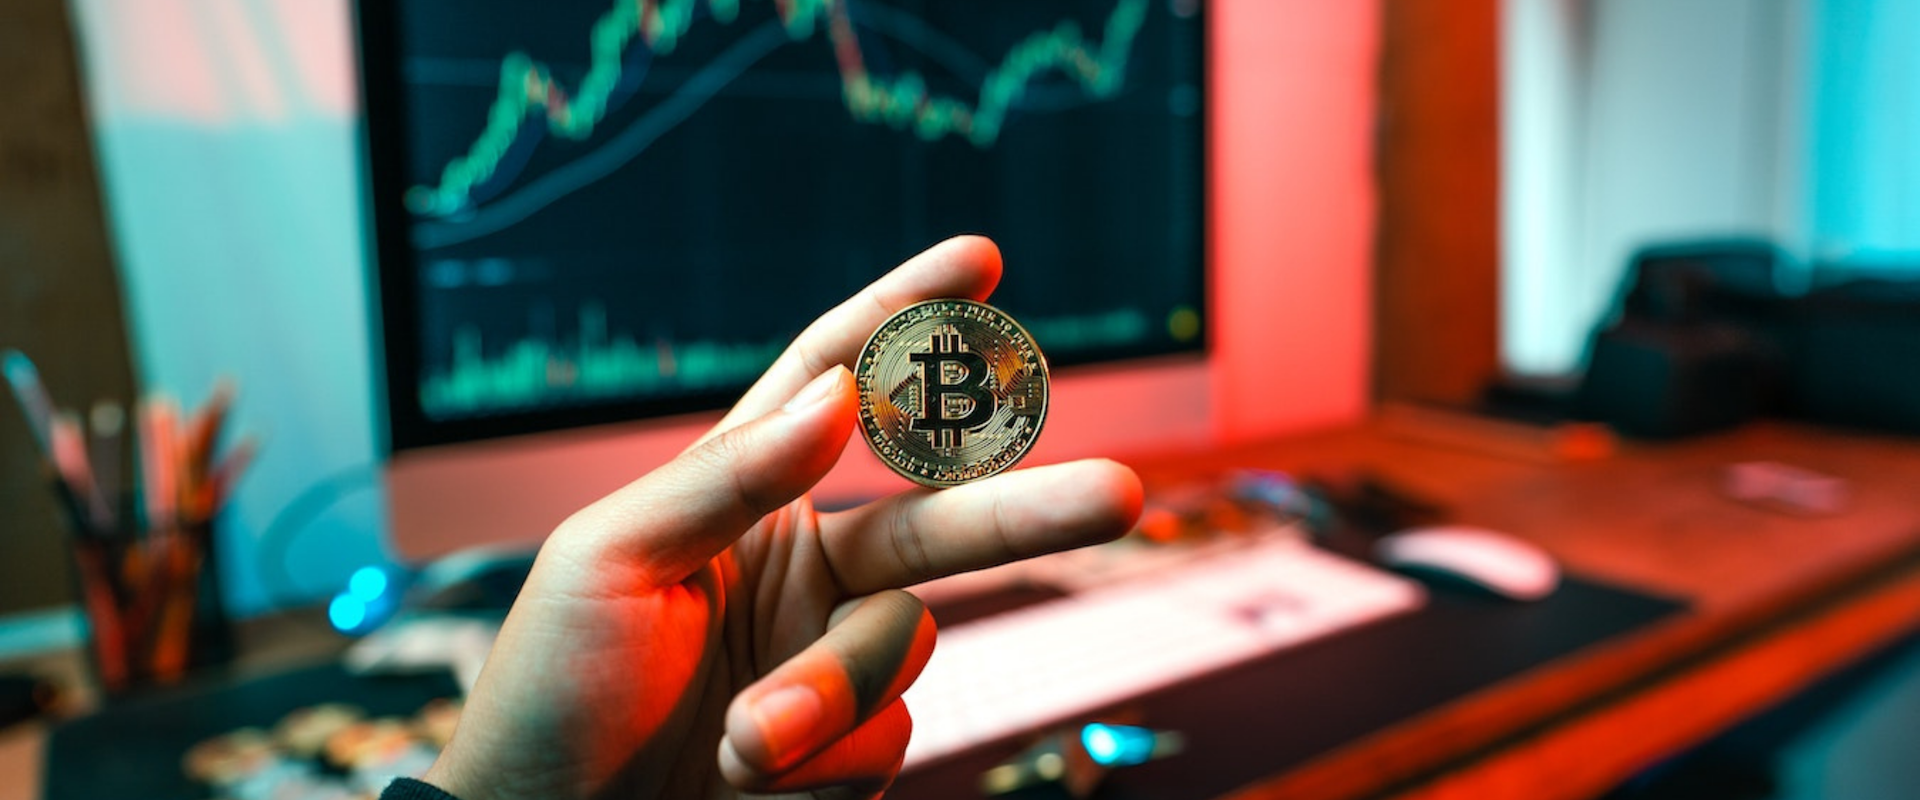 The down-low on crypto: how trading digital currencies could be impacting your mental health